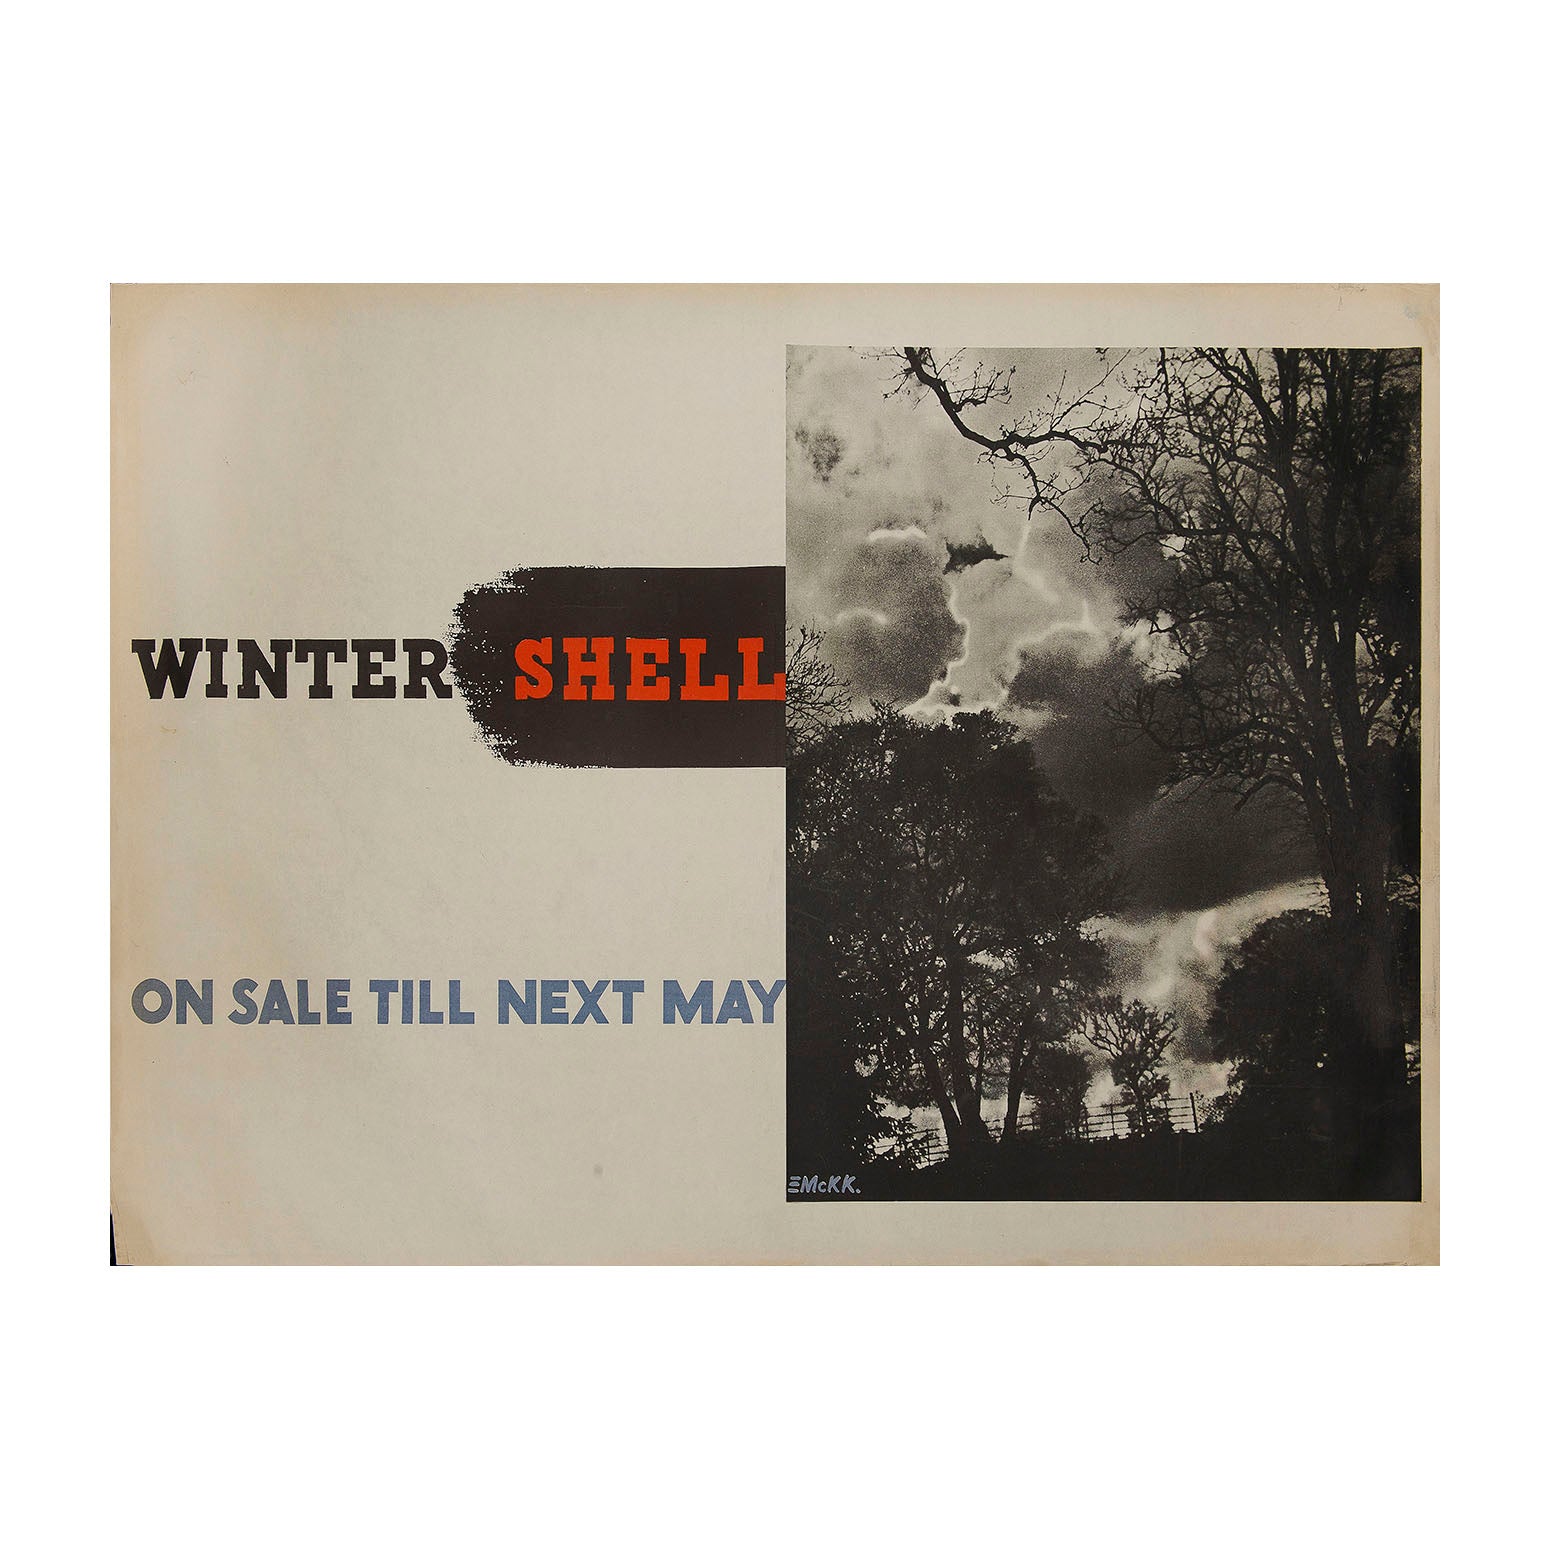 Original Shell poster: Winter Shell, Edward McKnight Kauffer, 1935. Dramatic black & white image of a wintry scene in the manner of the famous Shell Guides